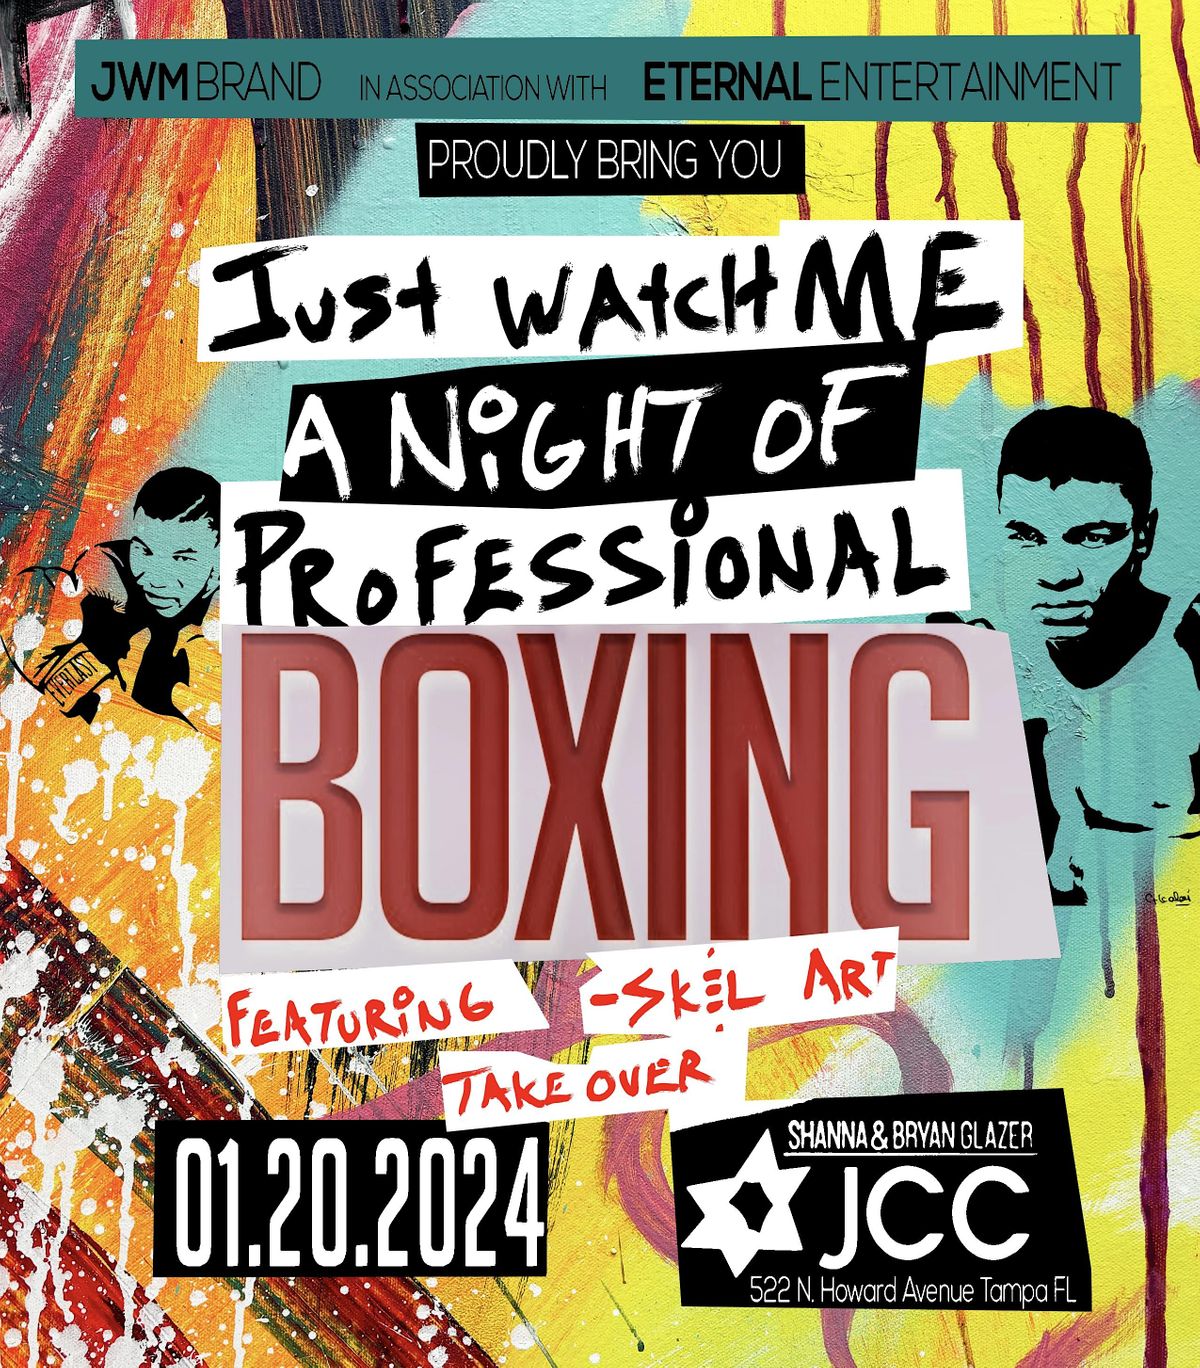 JUST WATCH ME - A NIGHT OF PROFESSIONAL BOXING